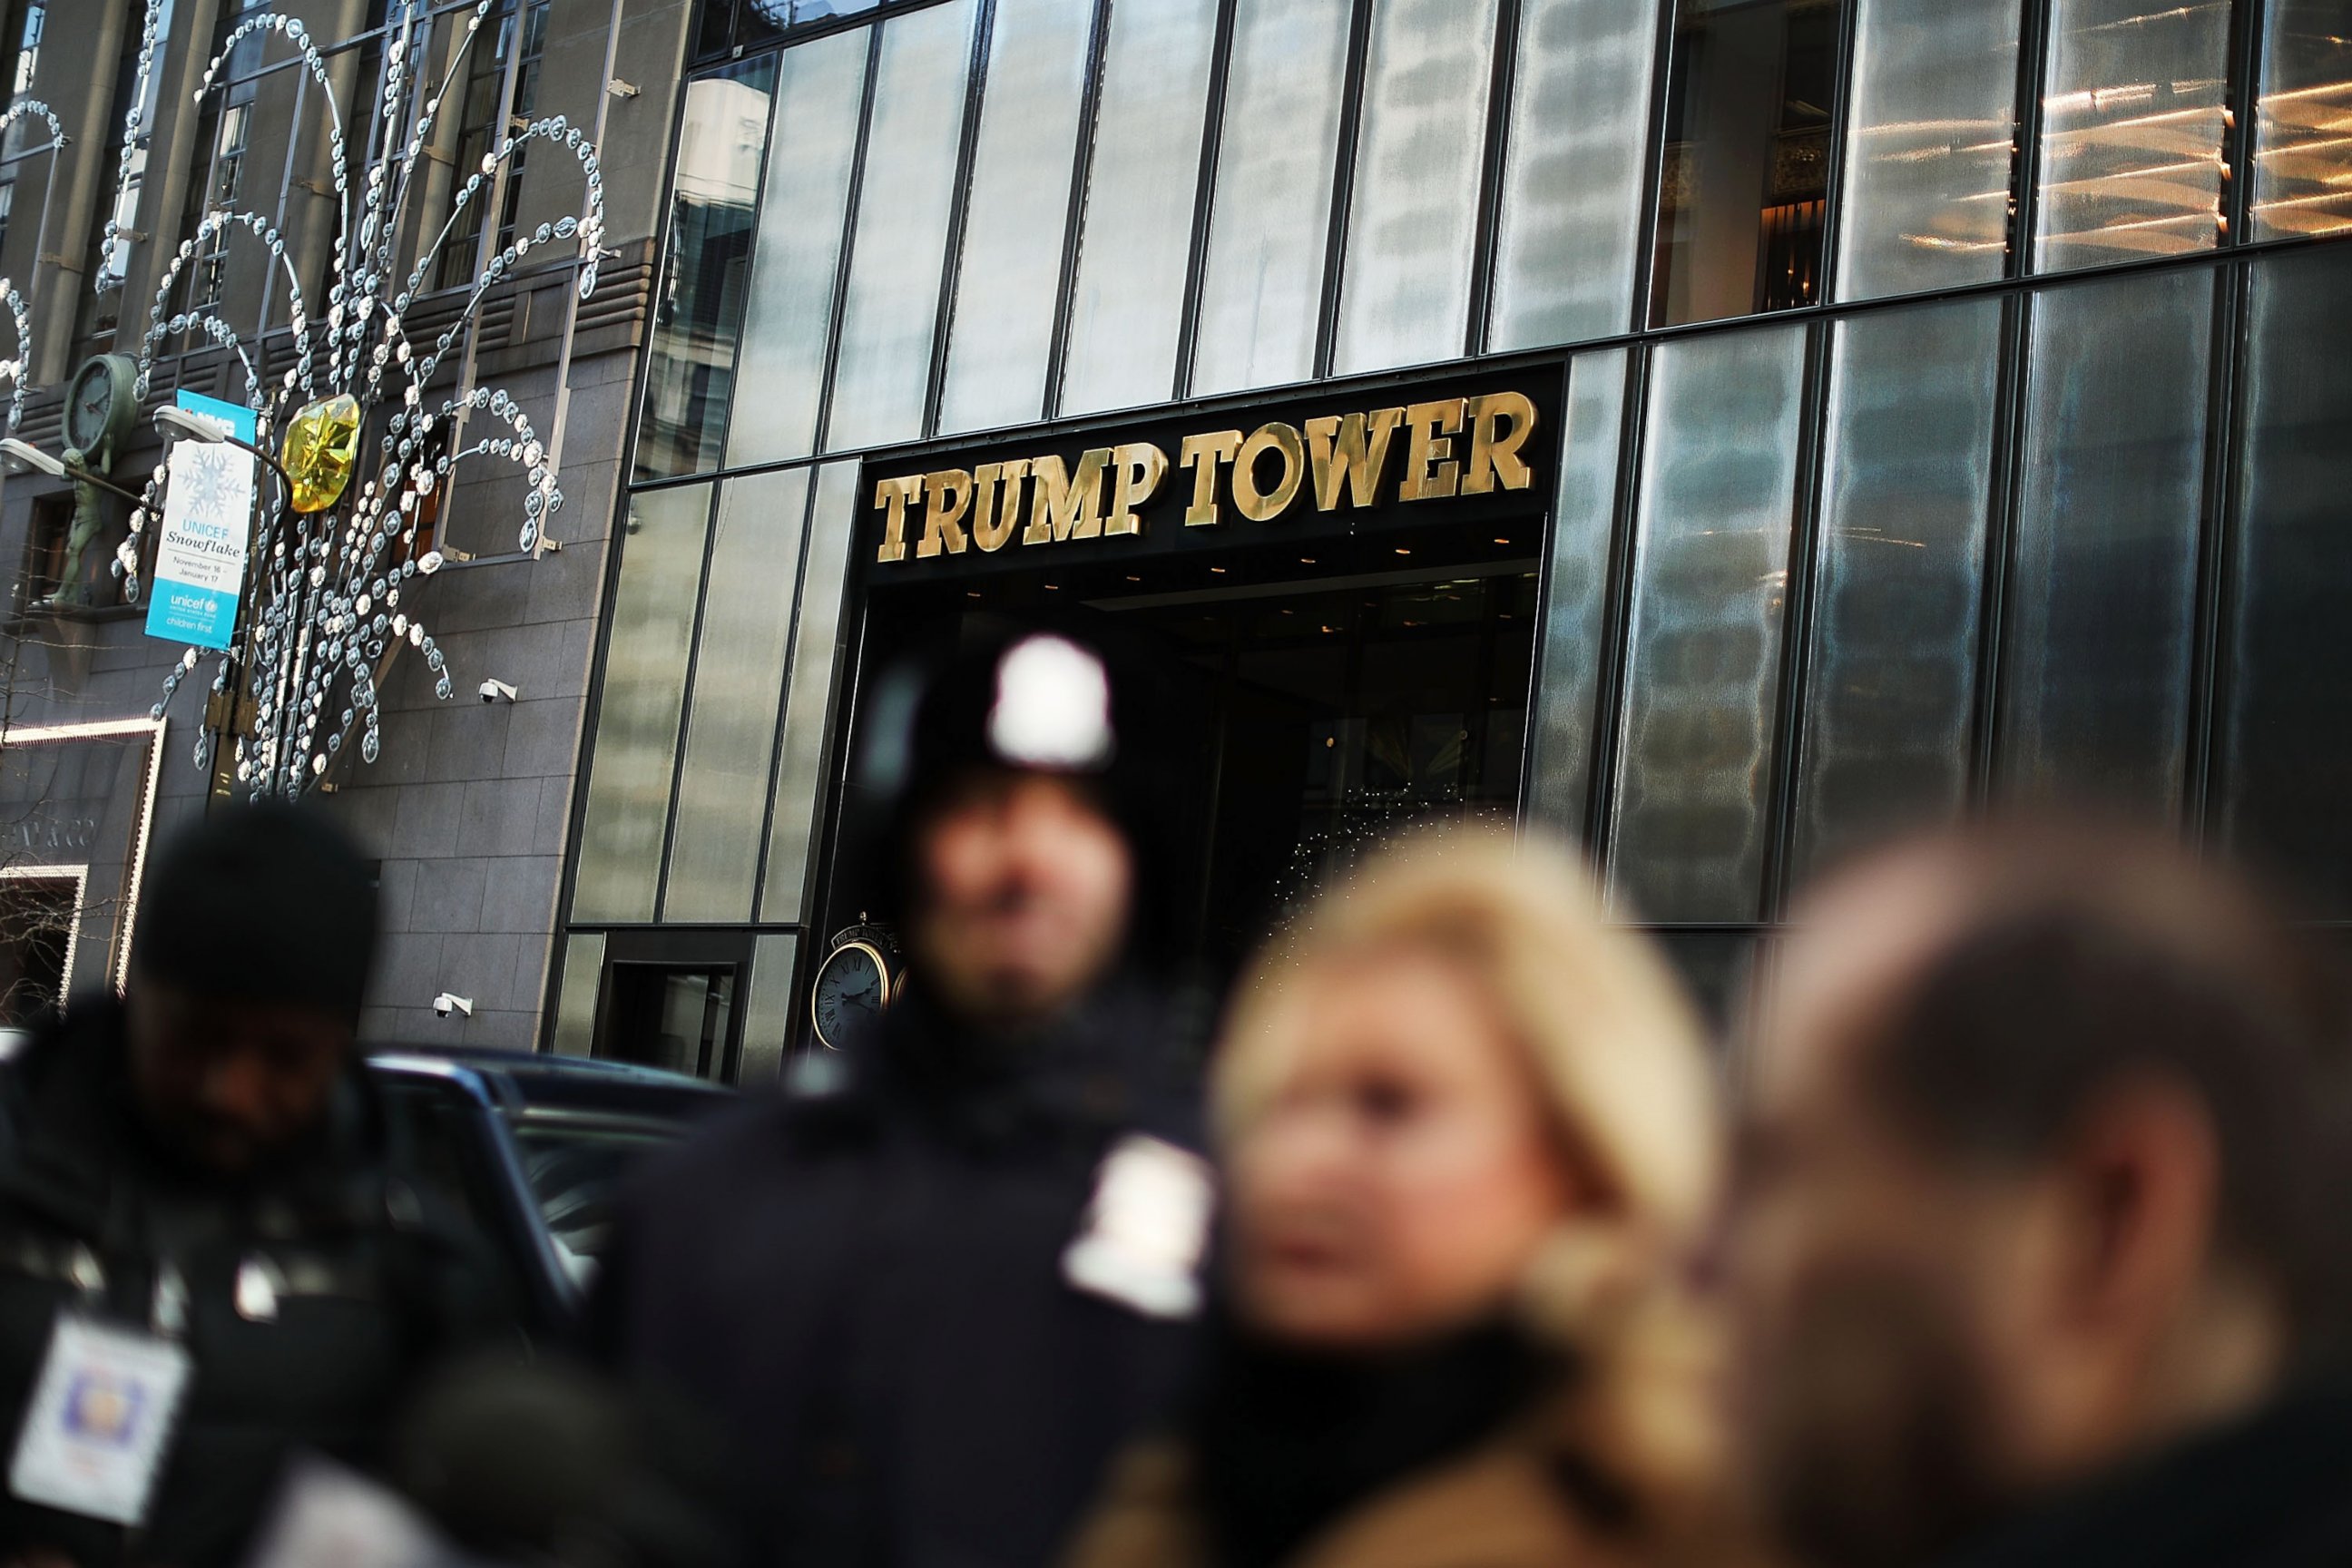 PHOTO: People stand outside of Trump Tower during a press conference on Dec. 9, 2016 in New York.